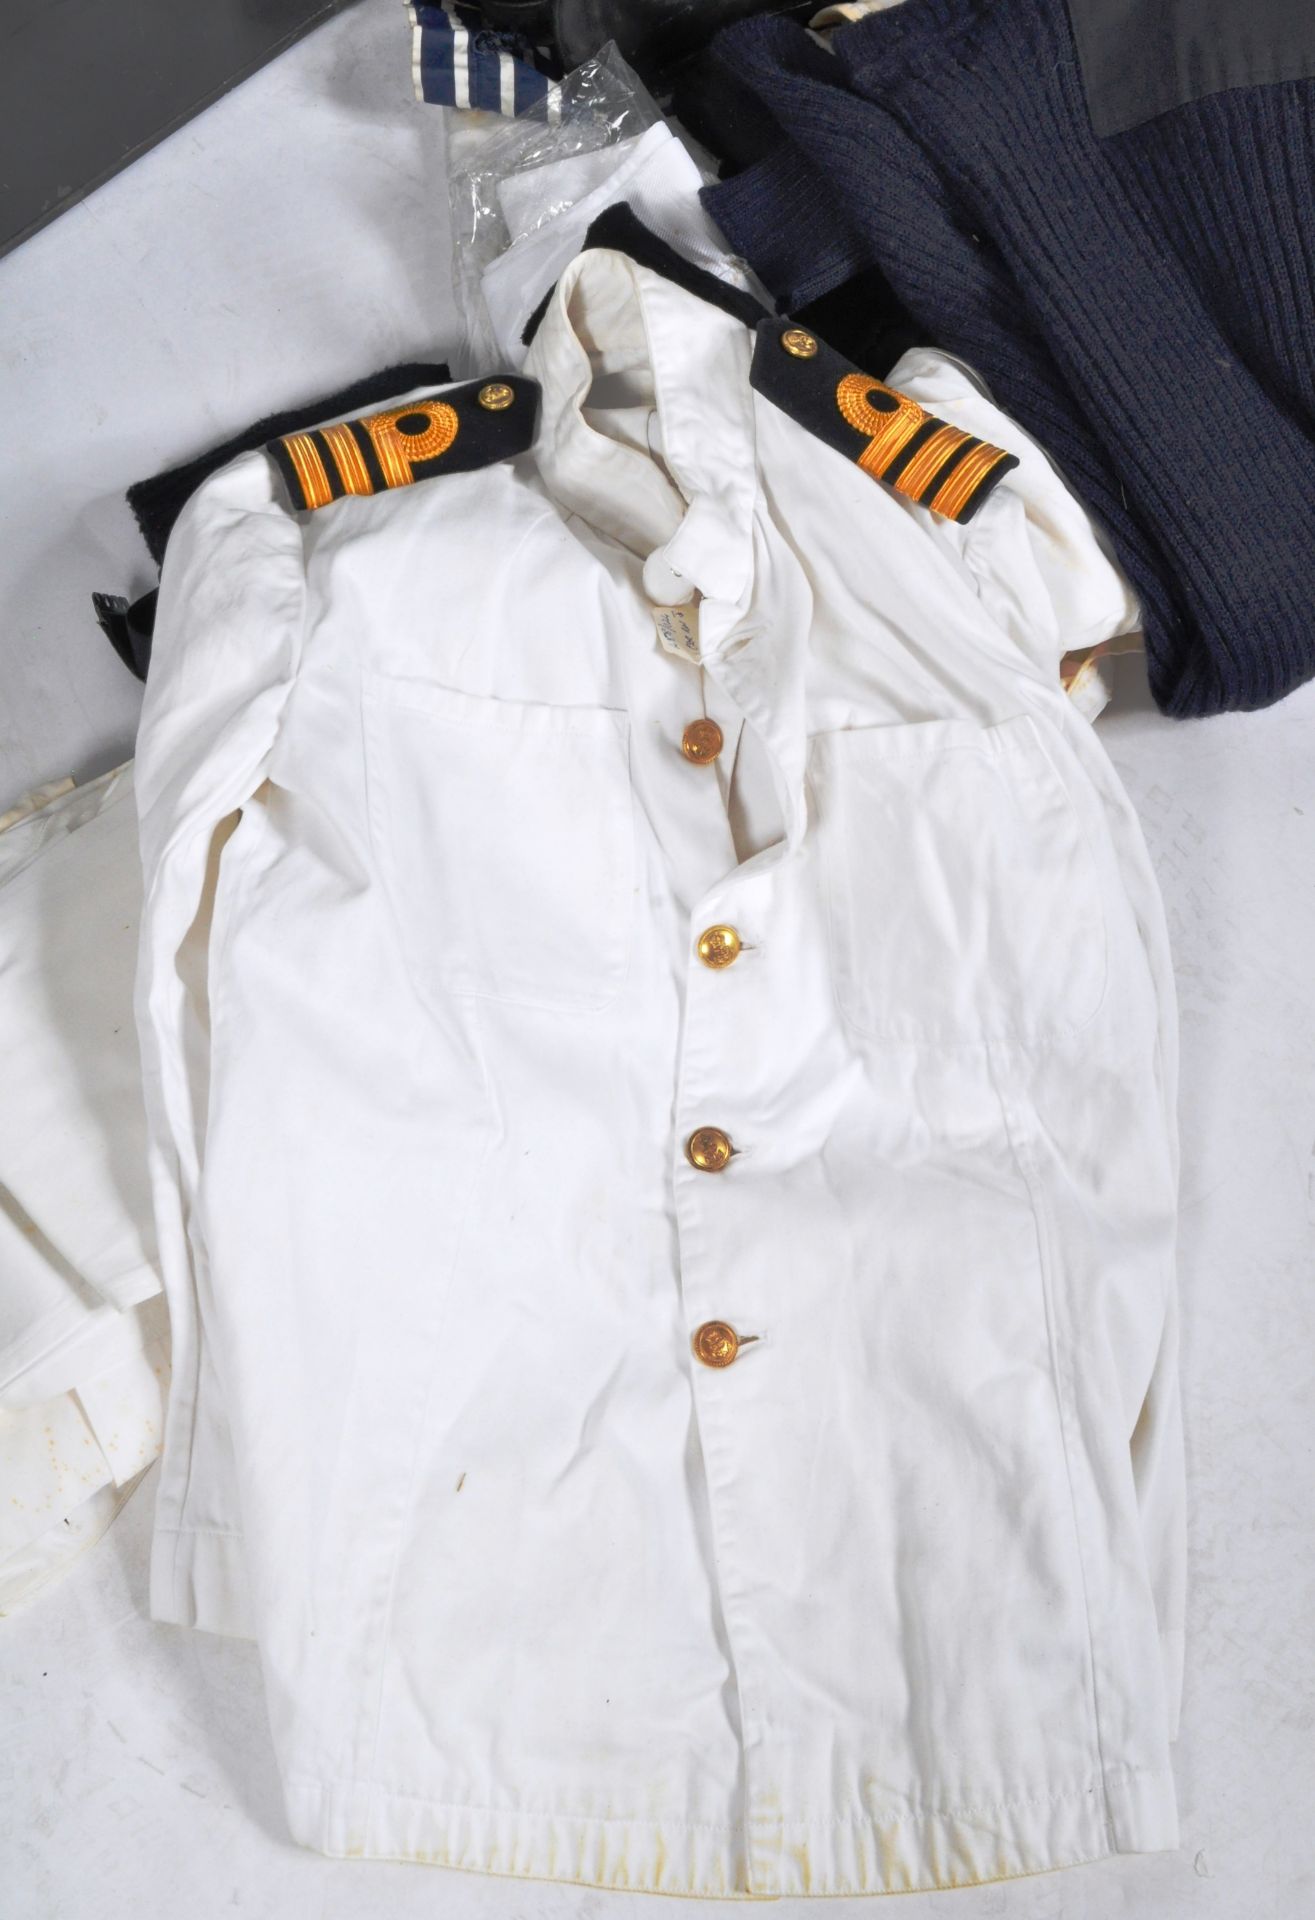 COLLECTION OF POST WAR ROYAL NAVY COMMANDERS UNIFORM ITEMS - Image 5 of 10